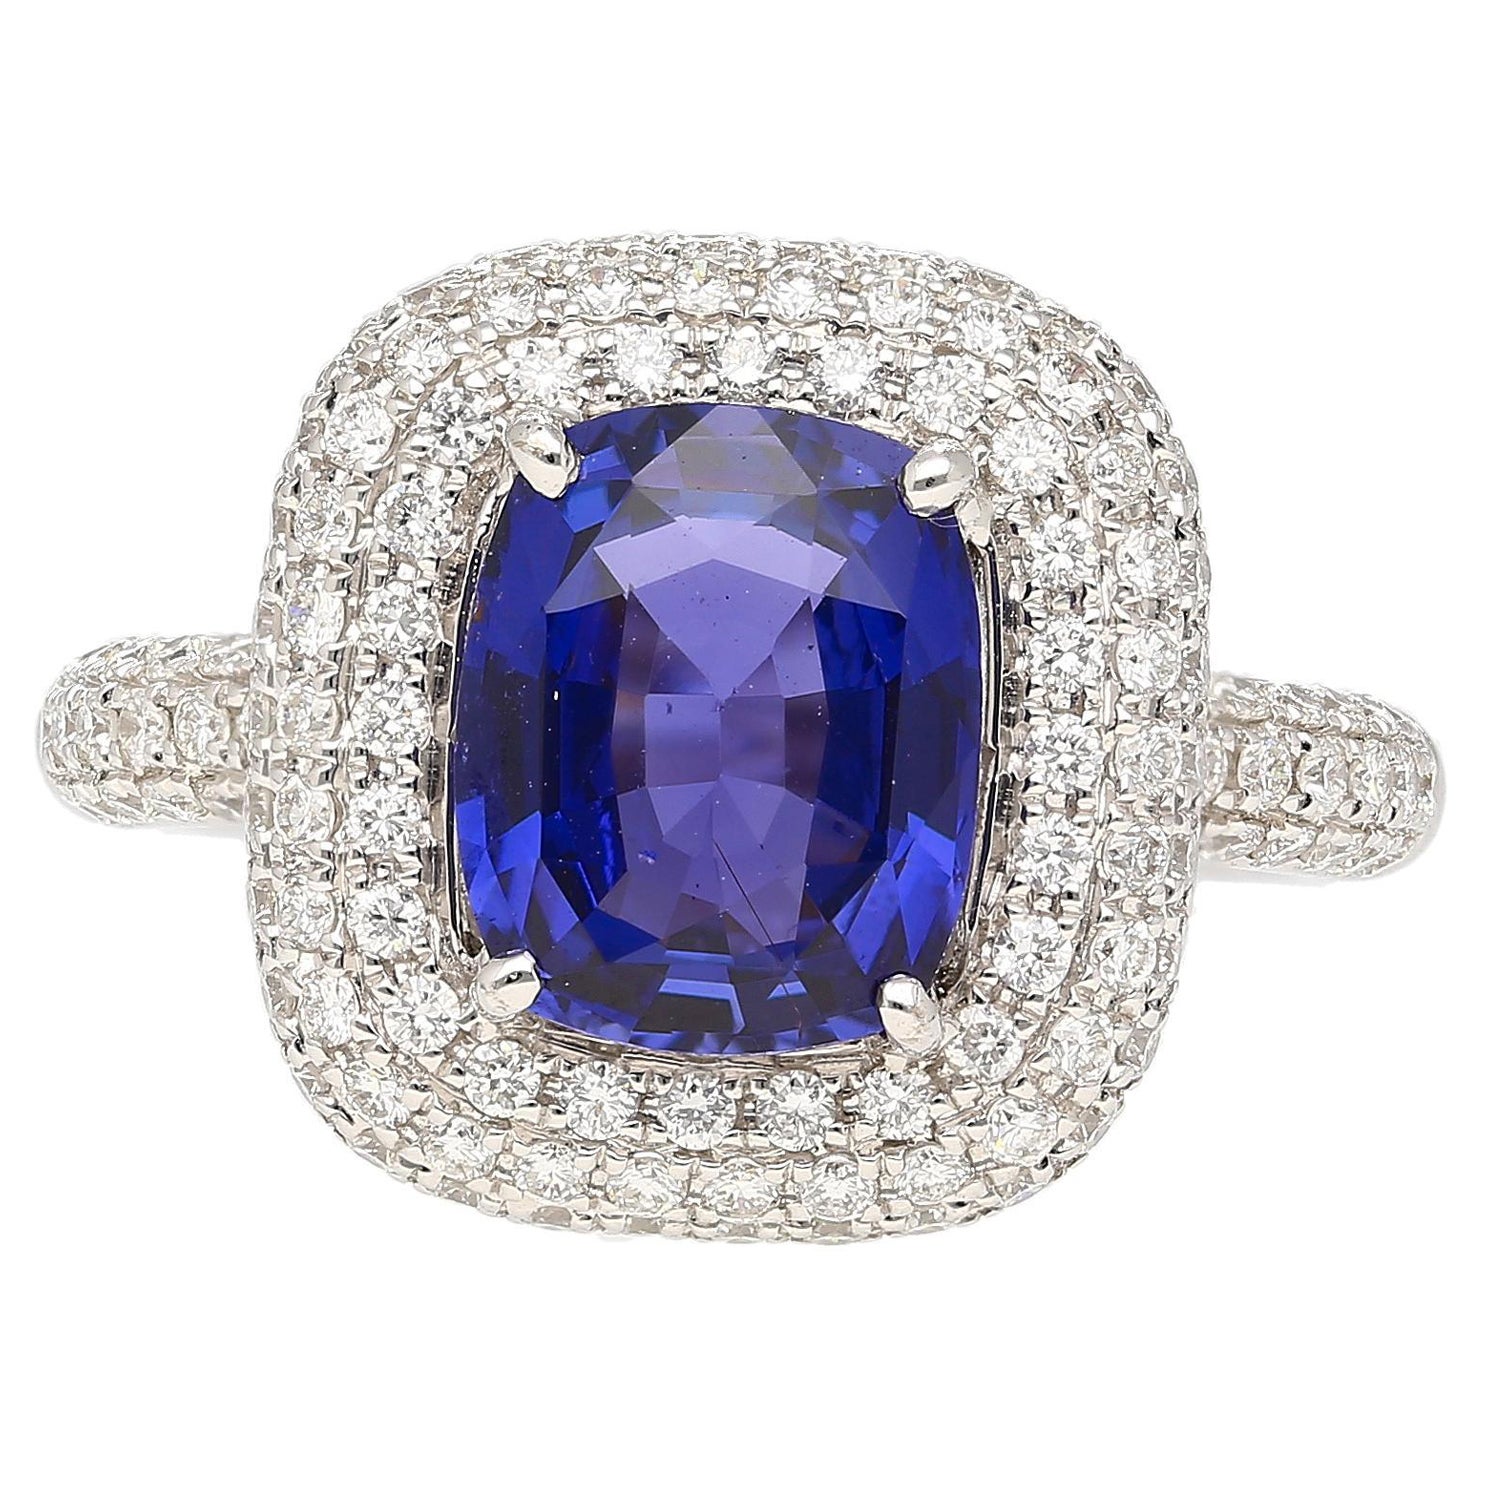 GIA Certified No Heat Color Change 3.25 Carat Violet-Blue Sapphire Ring